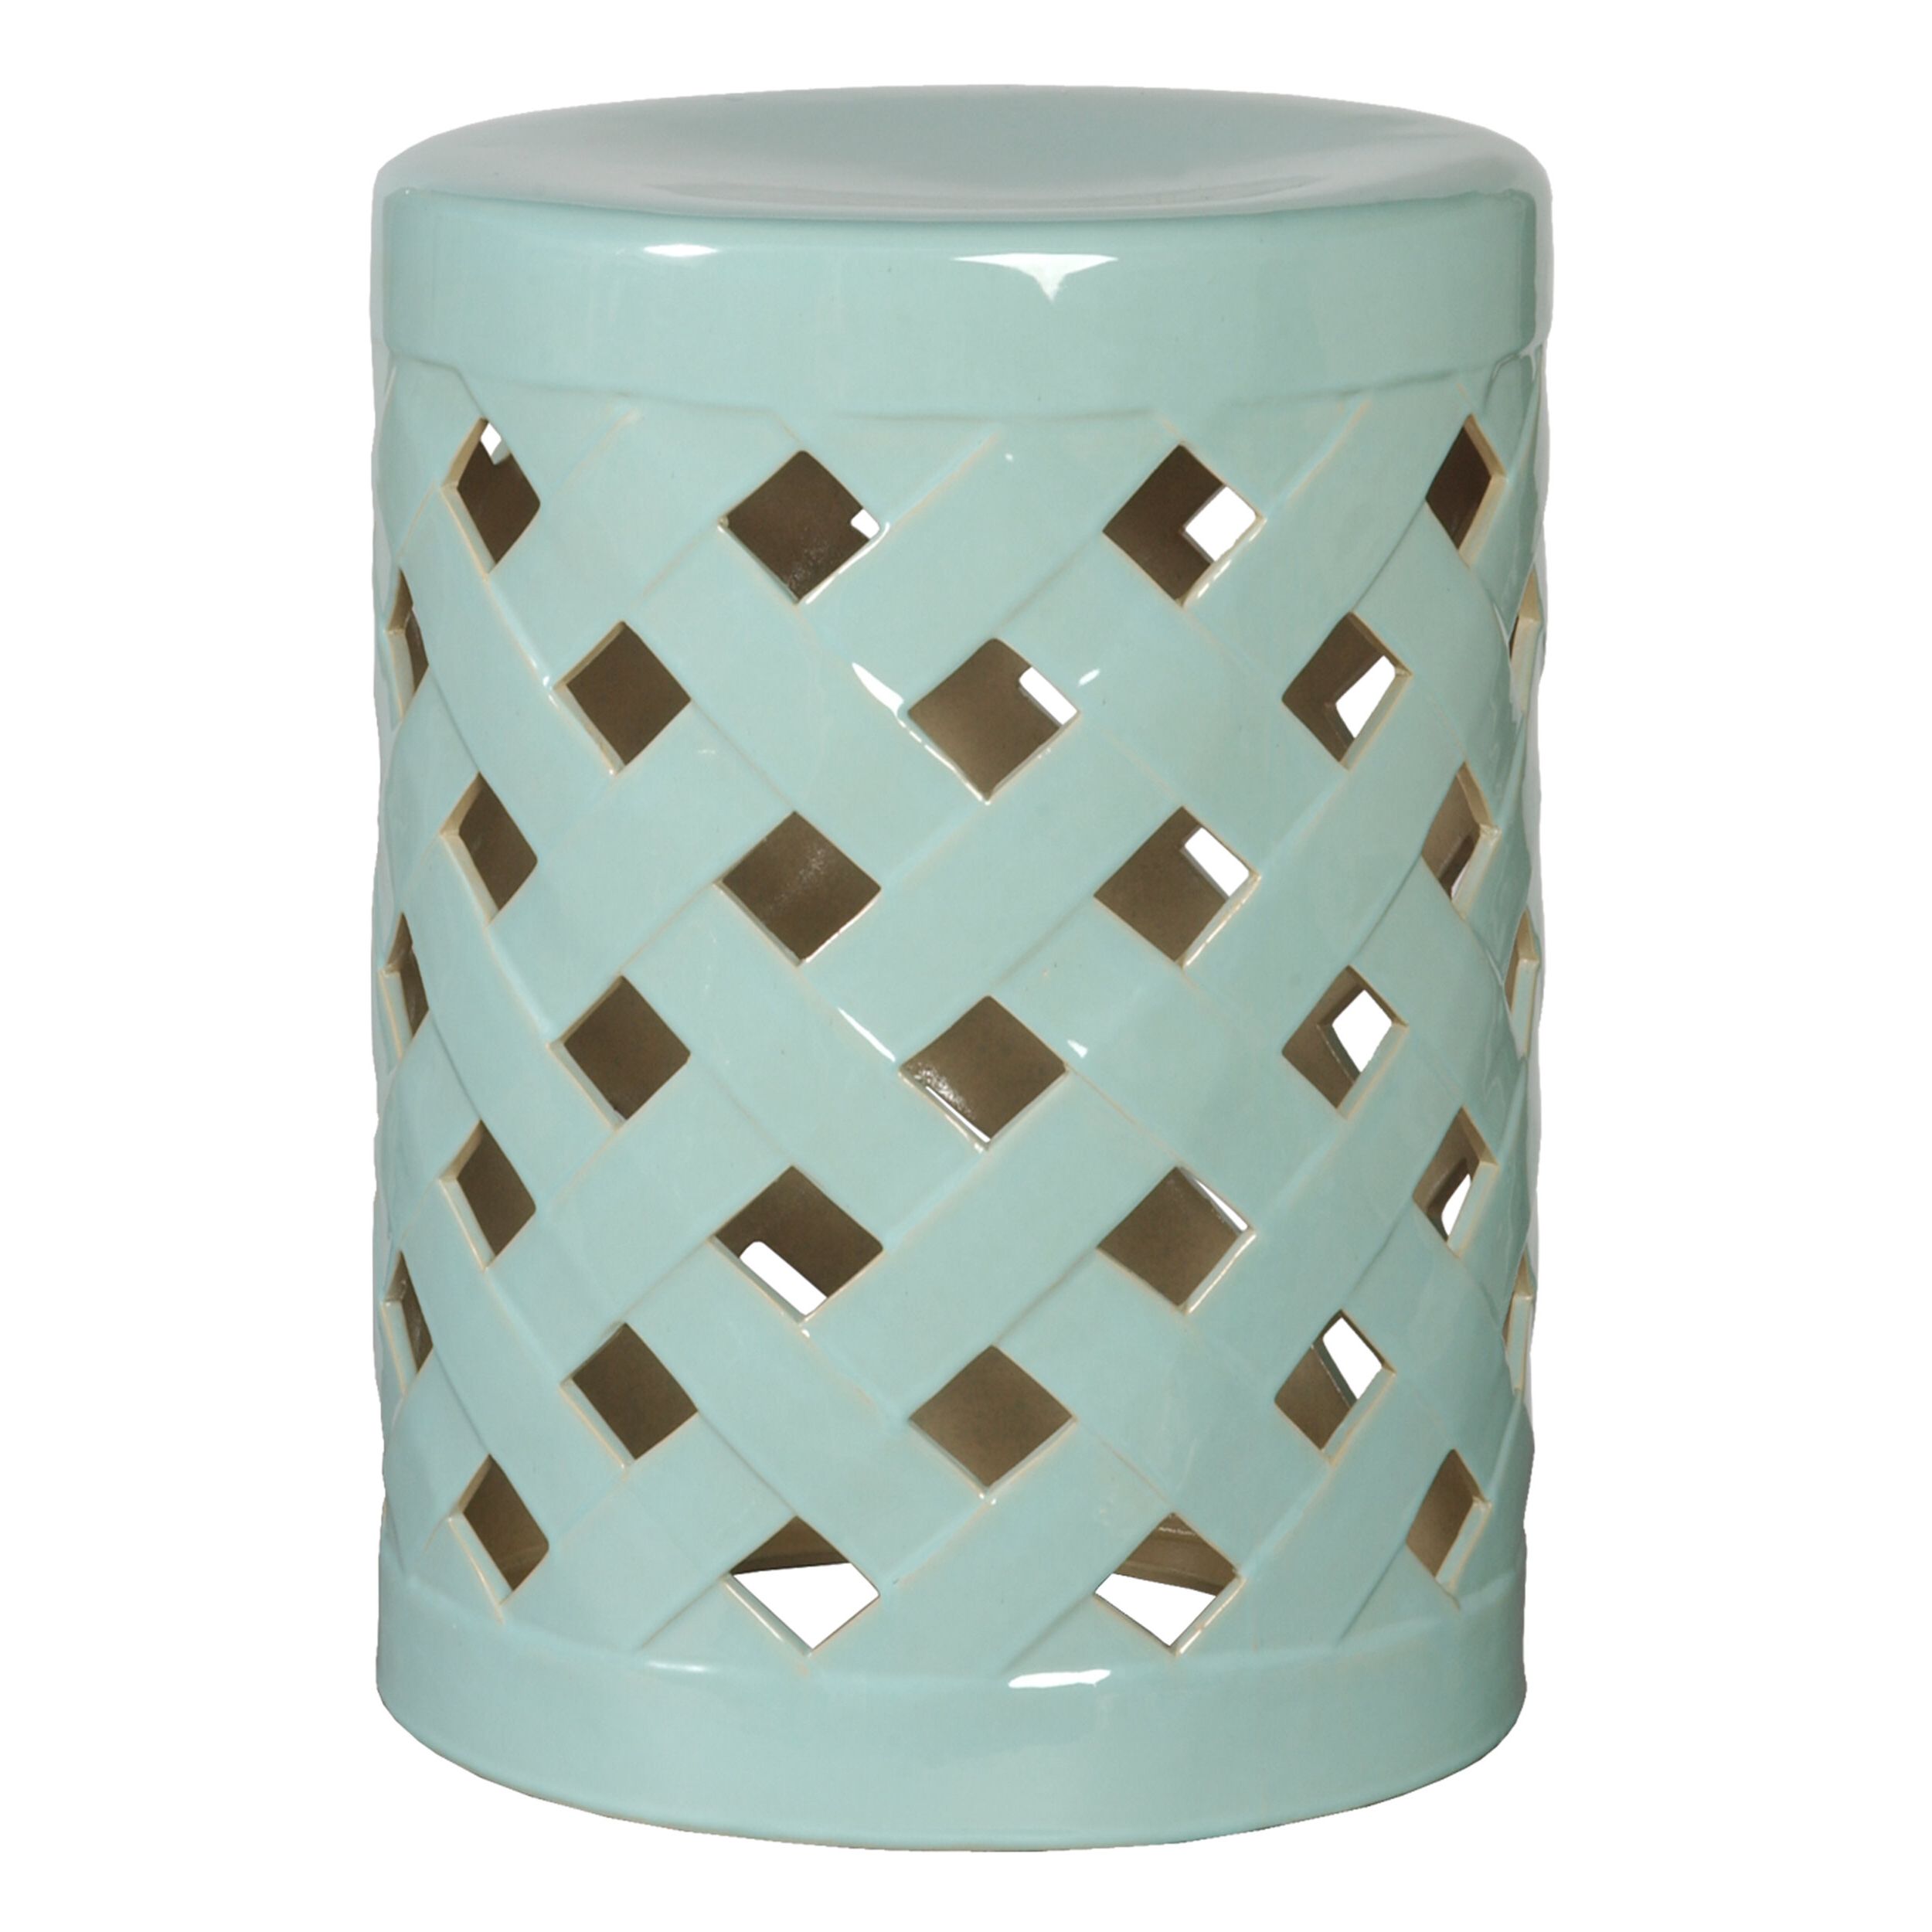 Preferred Ormside Ceramic Garden Stool Throughout Horsforth Garden Stools (View 11 of 30)